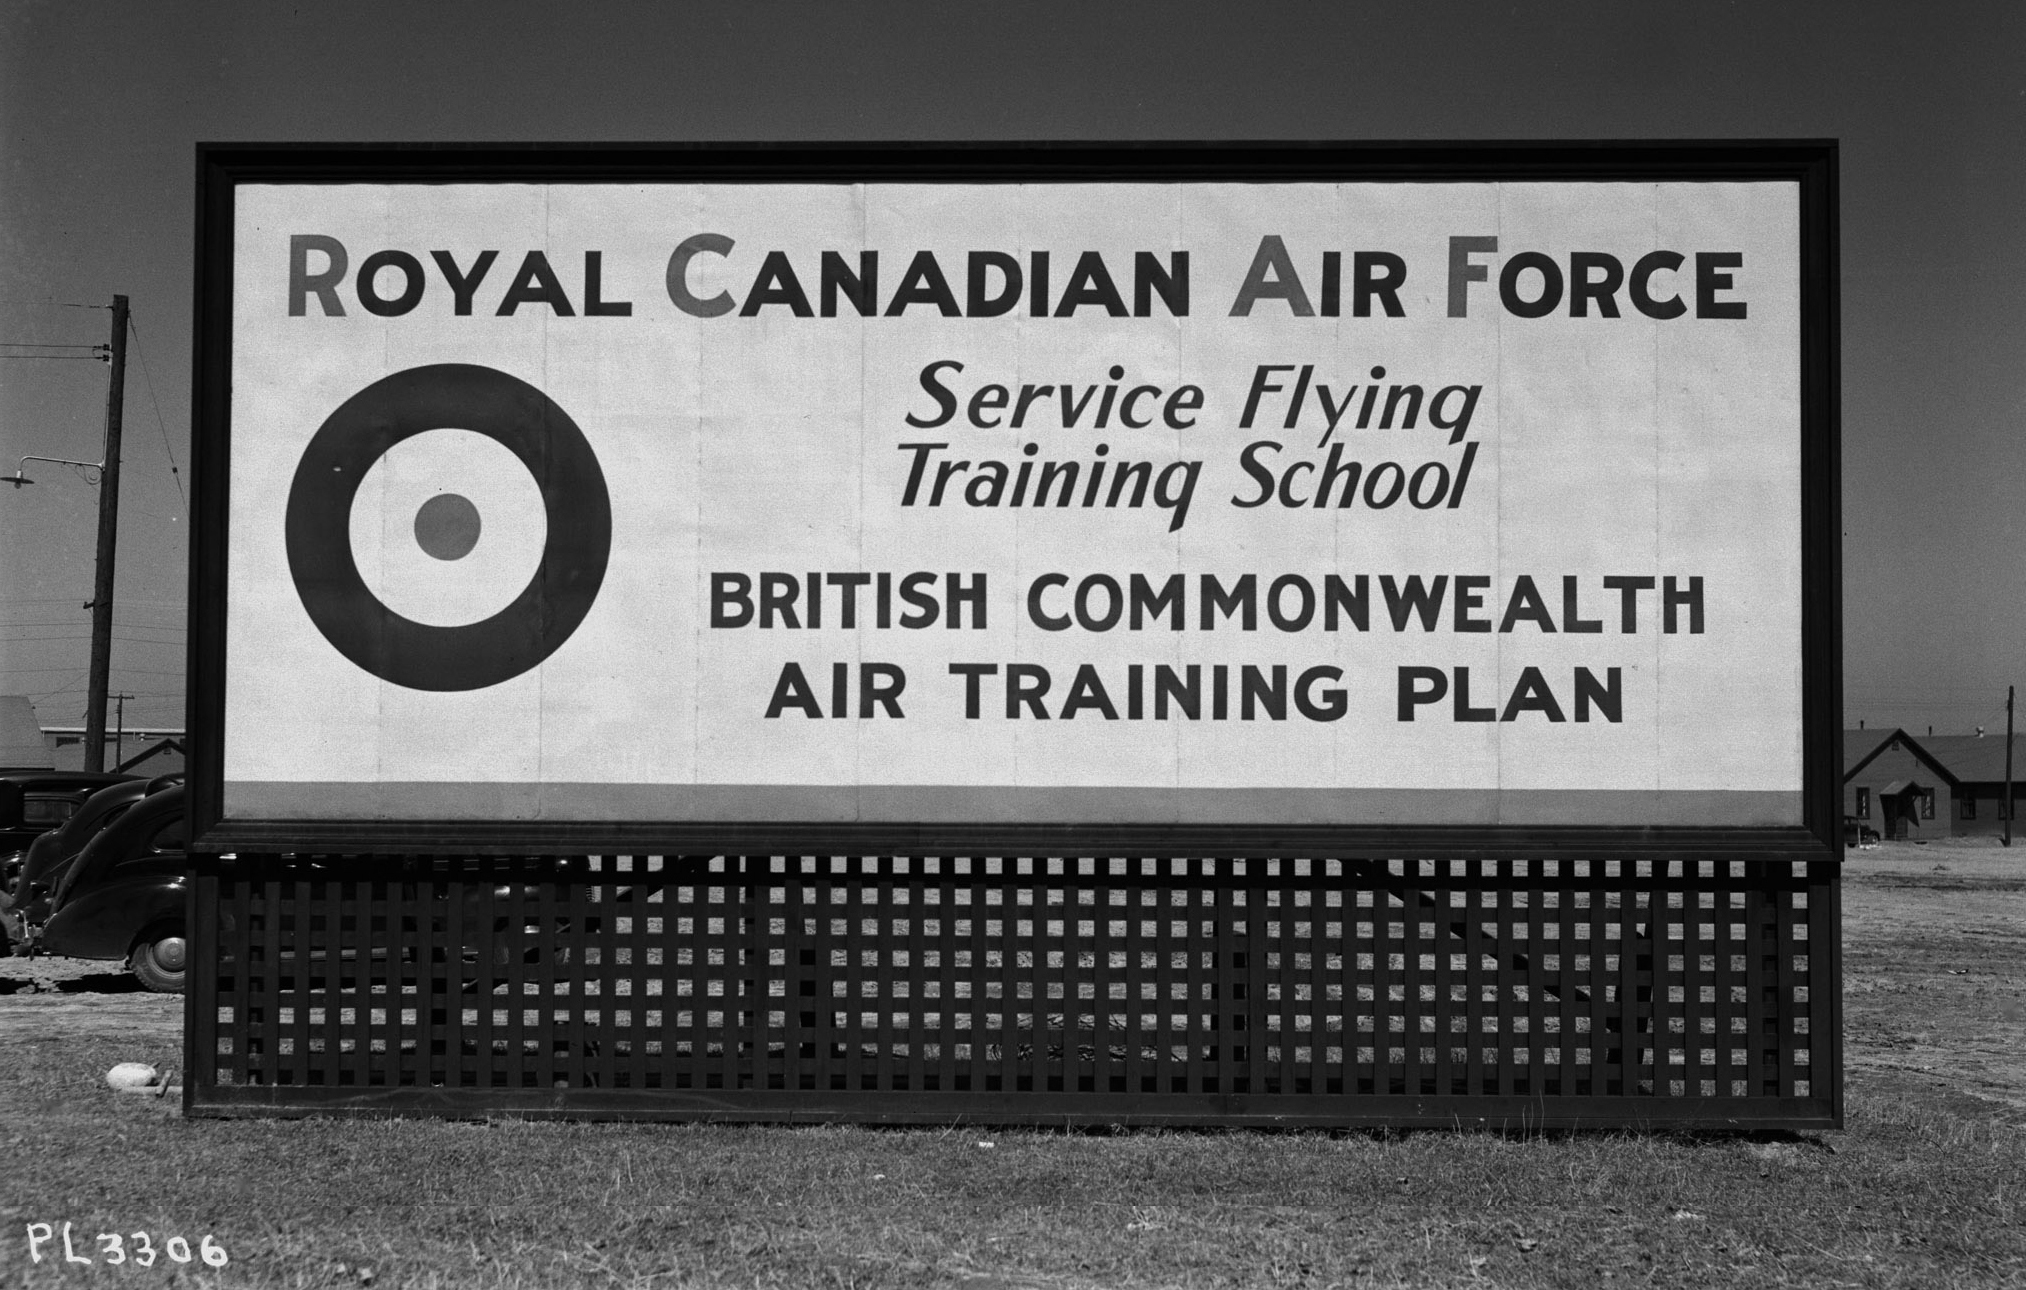 Signs such as this became part A large white sign with black lettering and an Air Force roundel in the corner.of the Canadian landscape as schools and airfields opened throughout the nation under the British Commonwealth Air Training Plan.